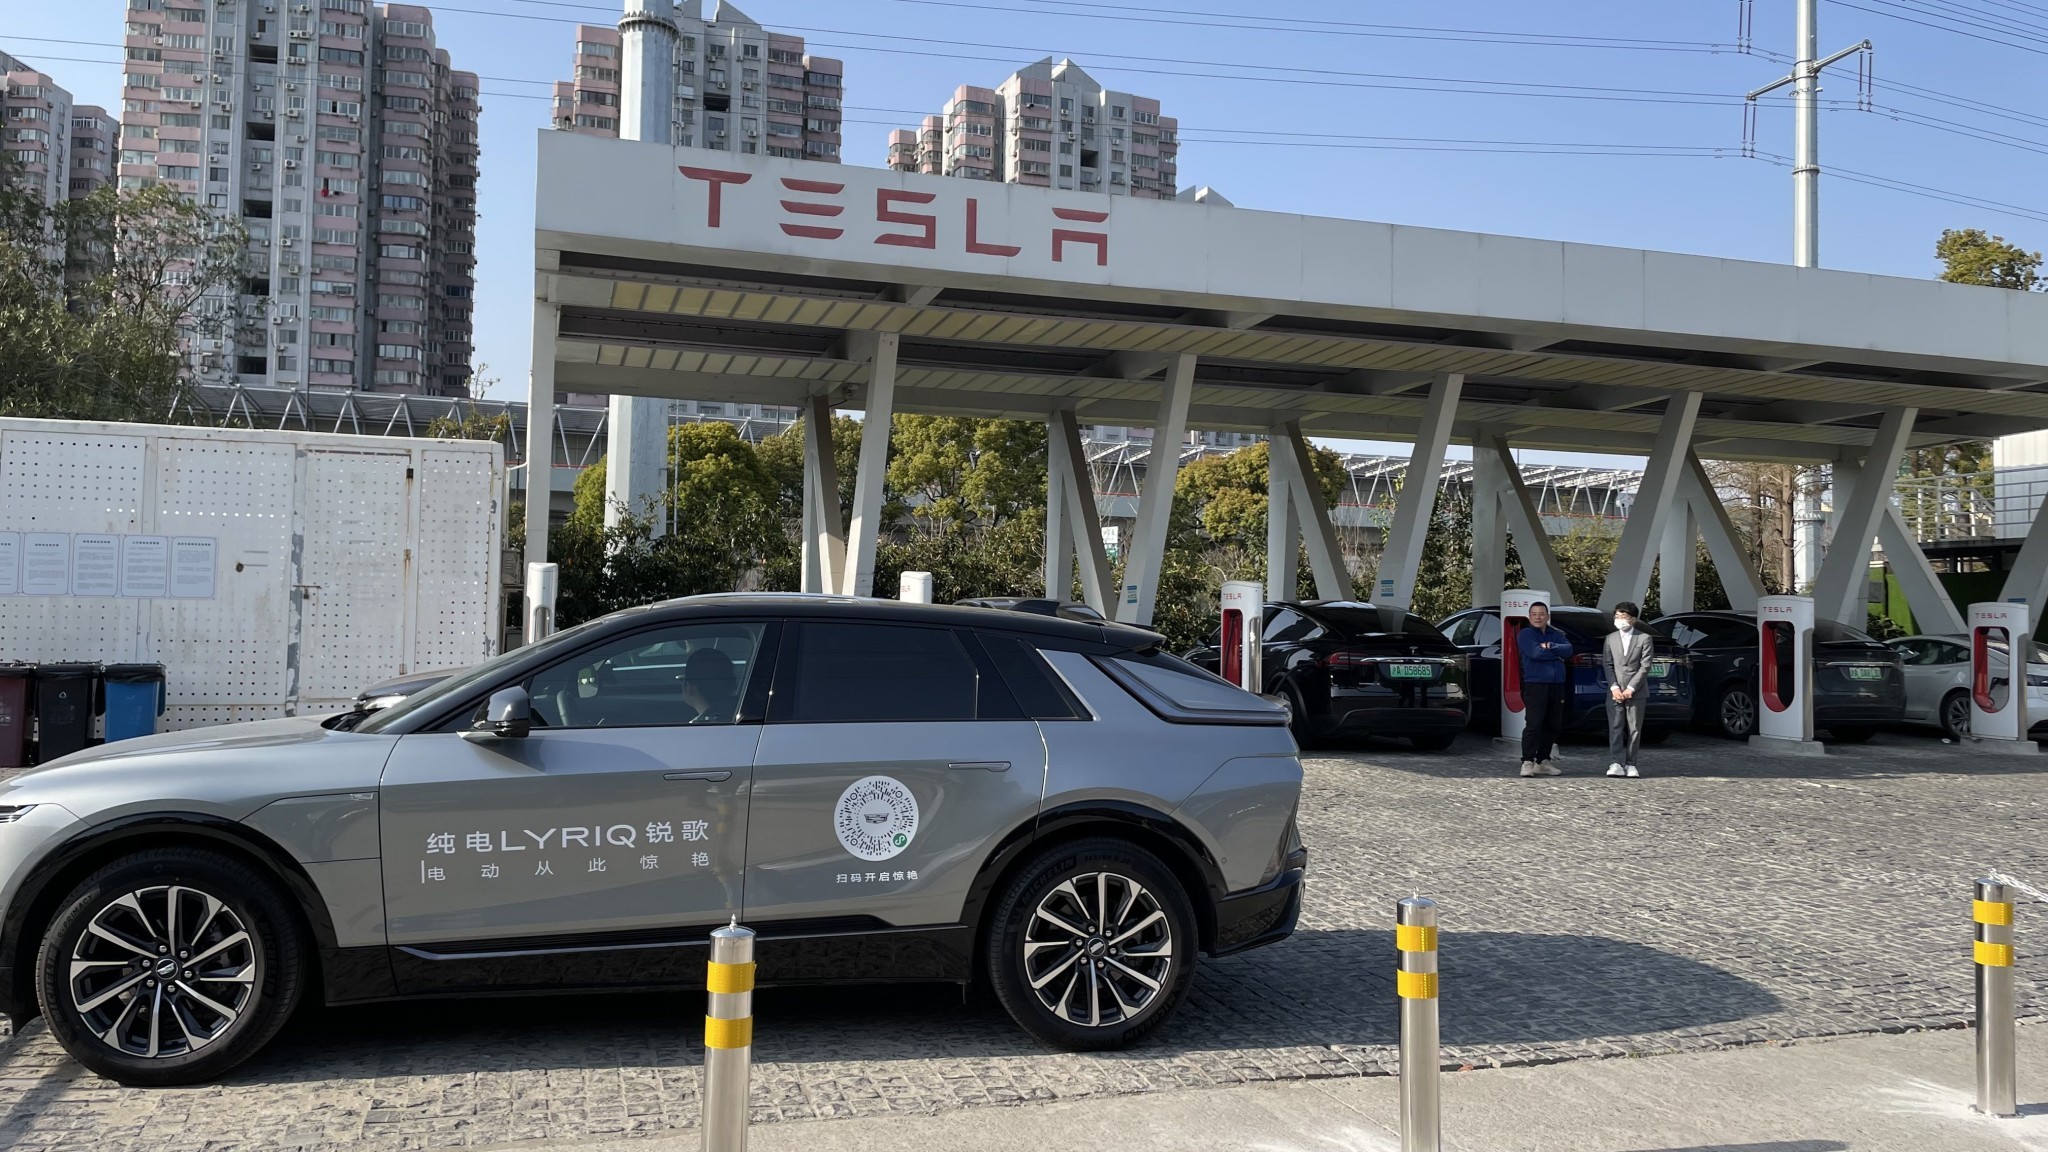 Cadillac Sales Team Trying to Lure Tesla Owners at Superchargers With Lyriq  Test Drives - autoevolution